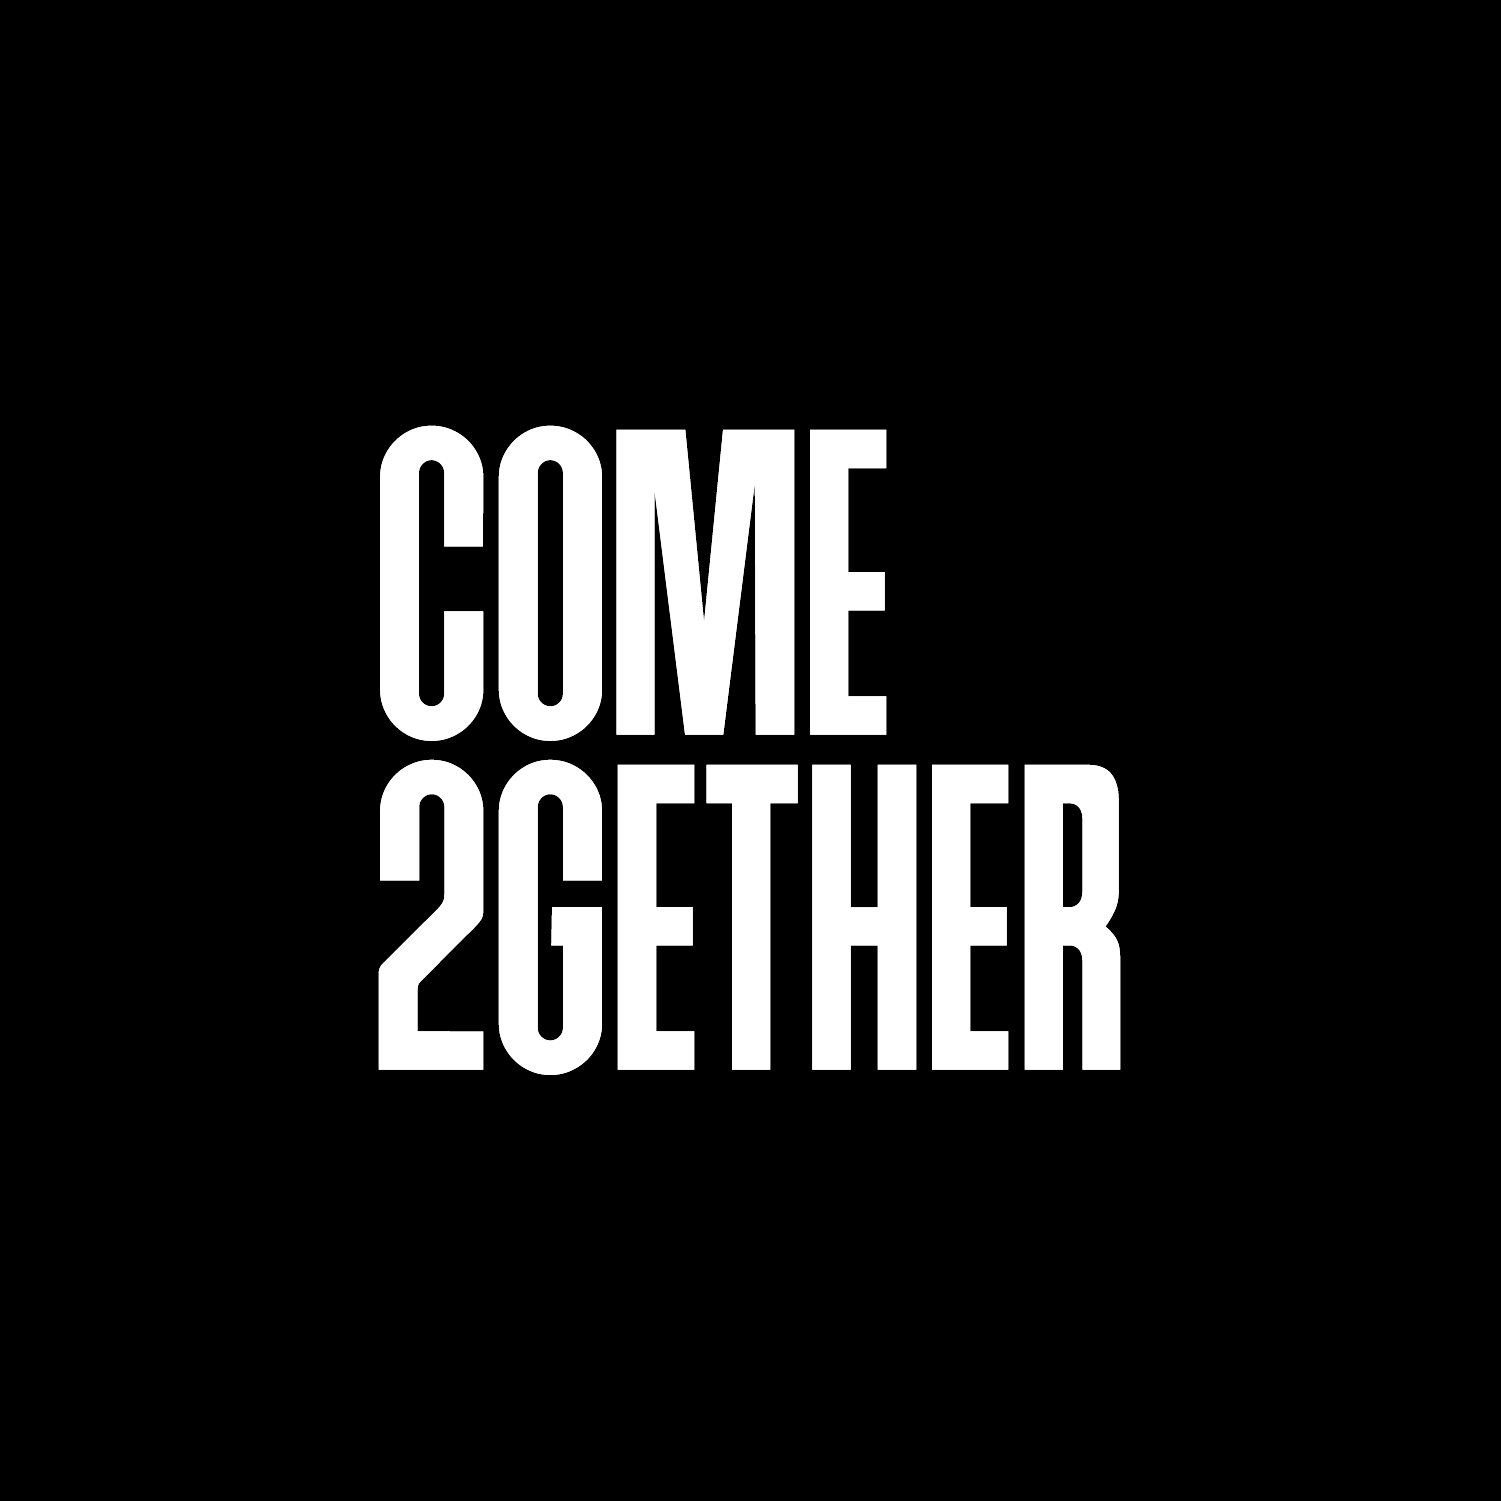 Come2gether